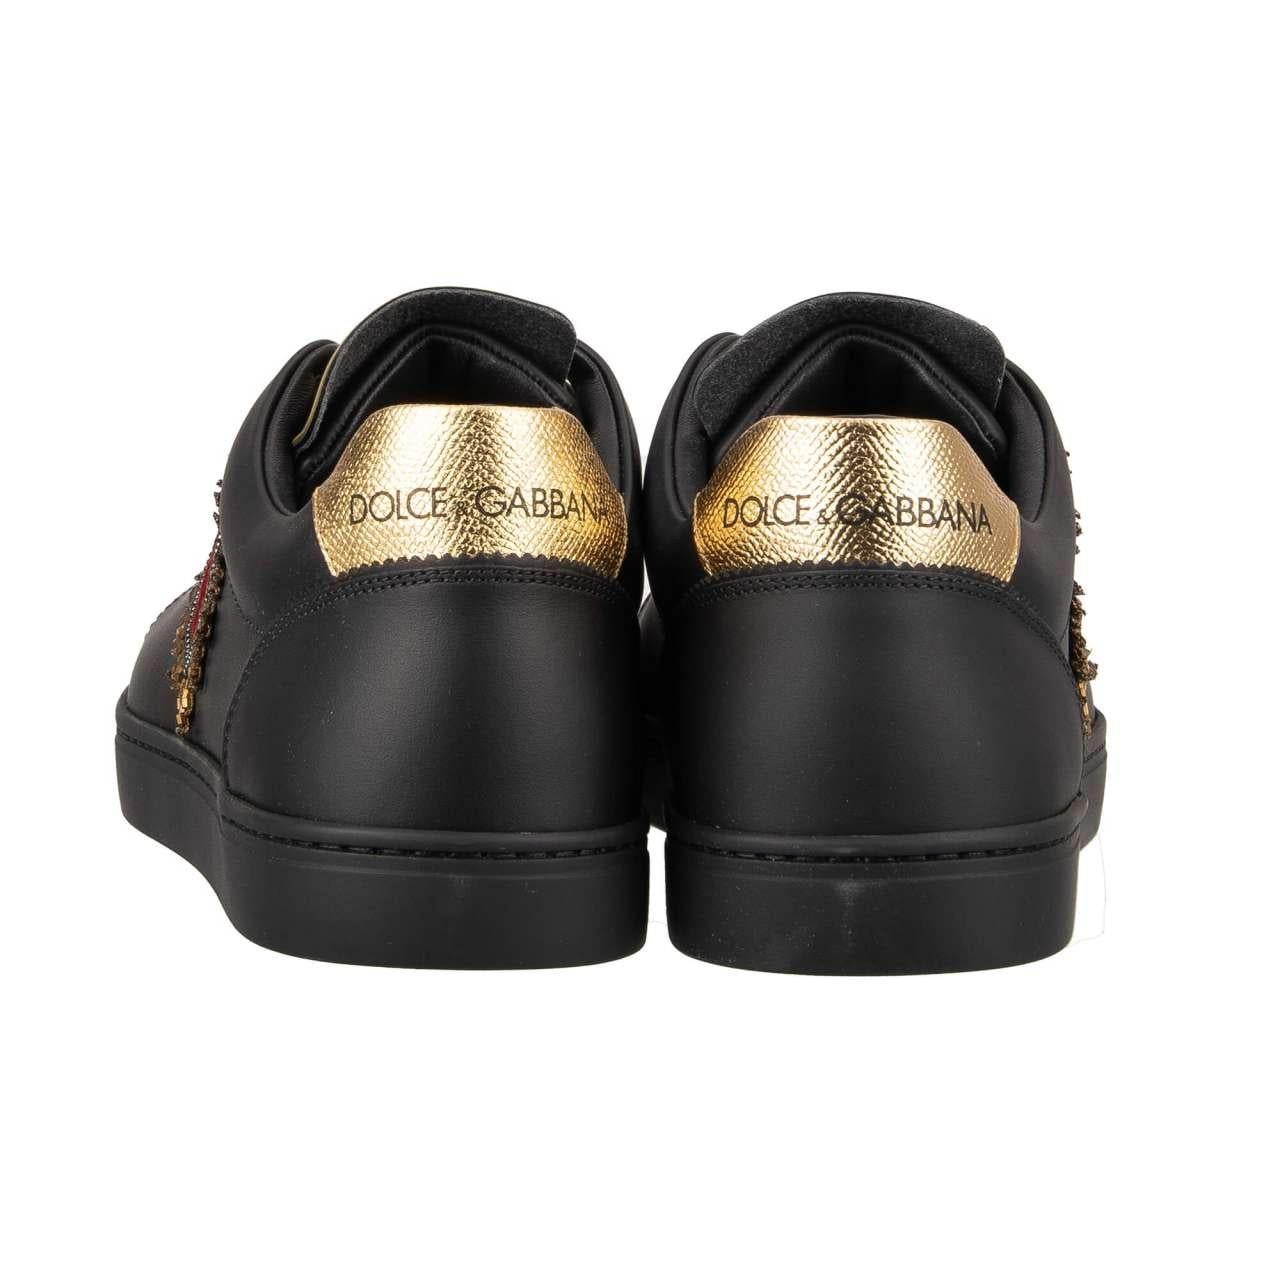 D&G - Low-Top Sneaker LONDON with Logo Heart Embroidery Black Gold EUR 43.5 For Sale 1